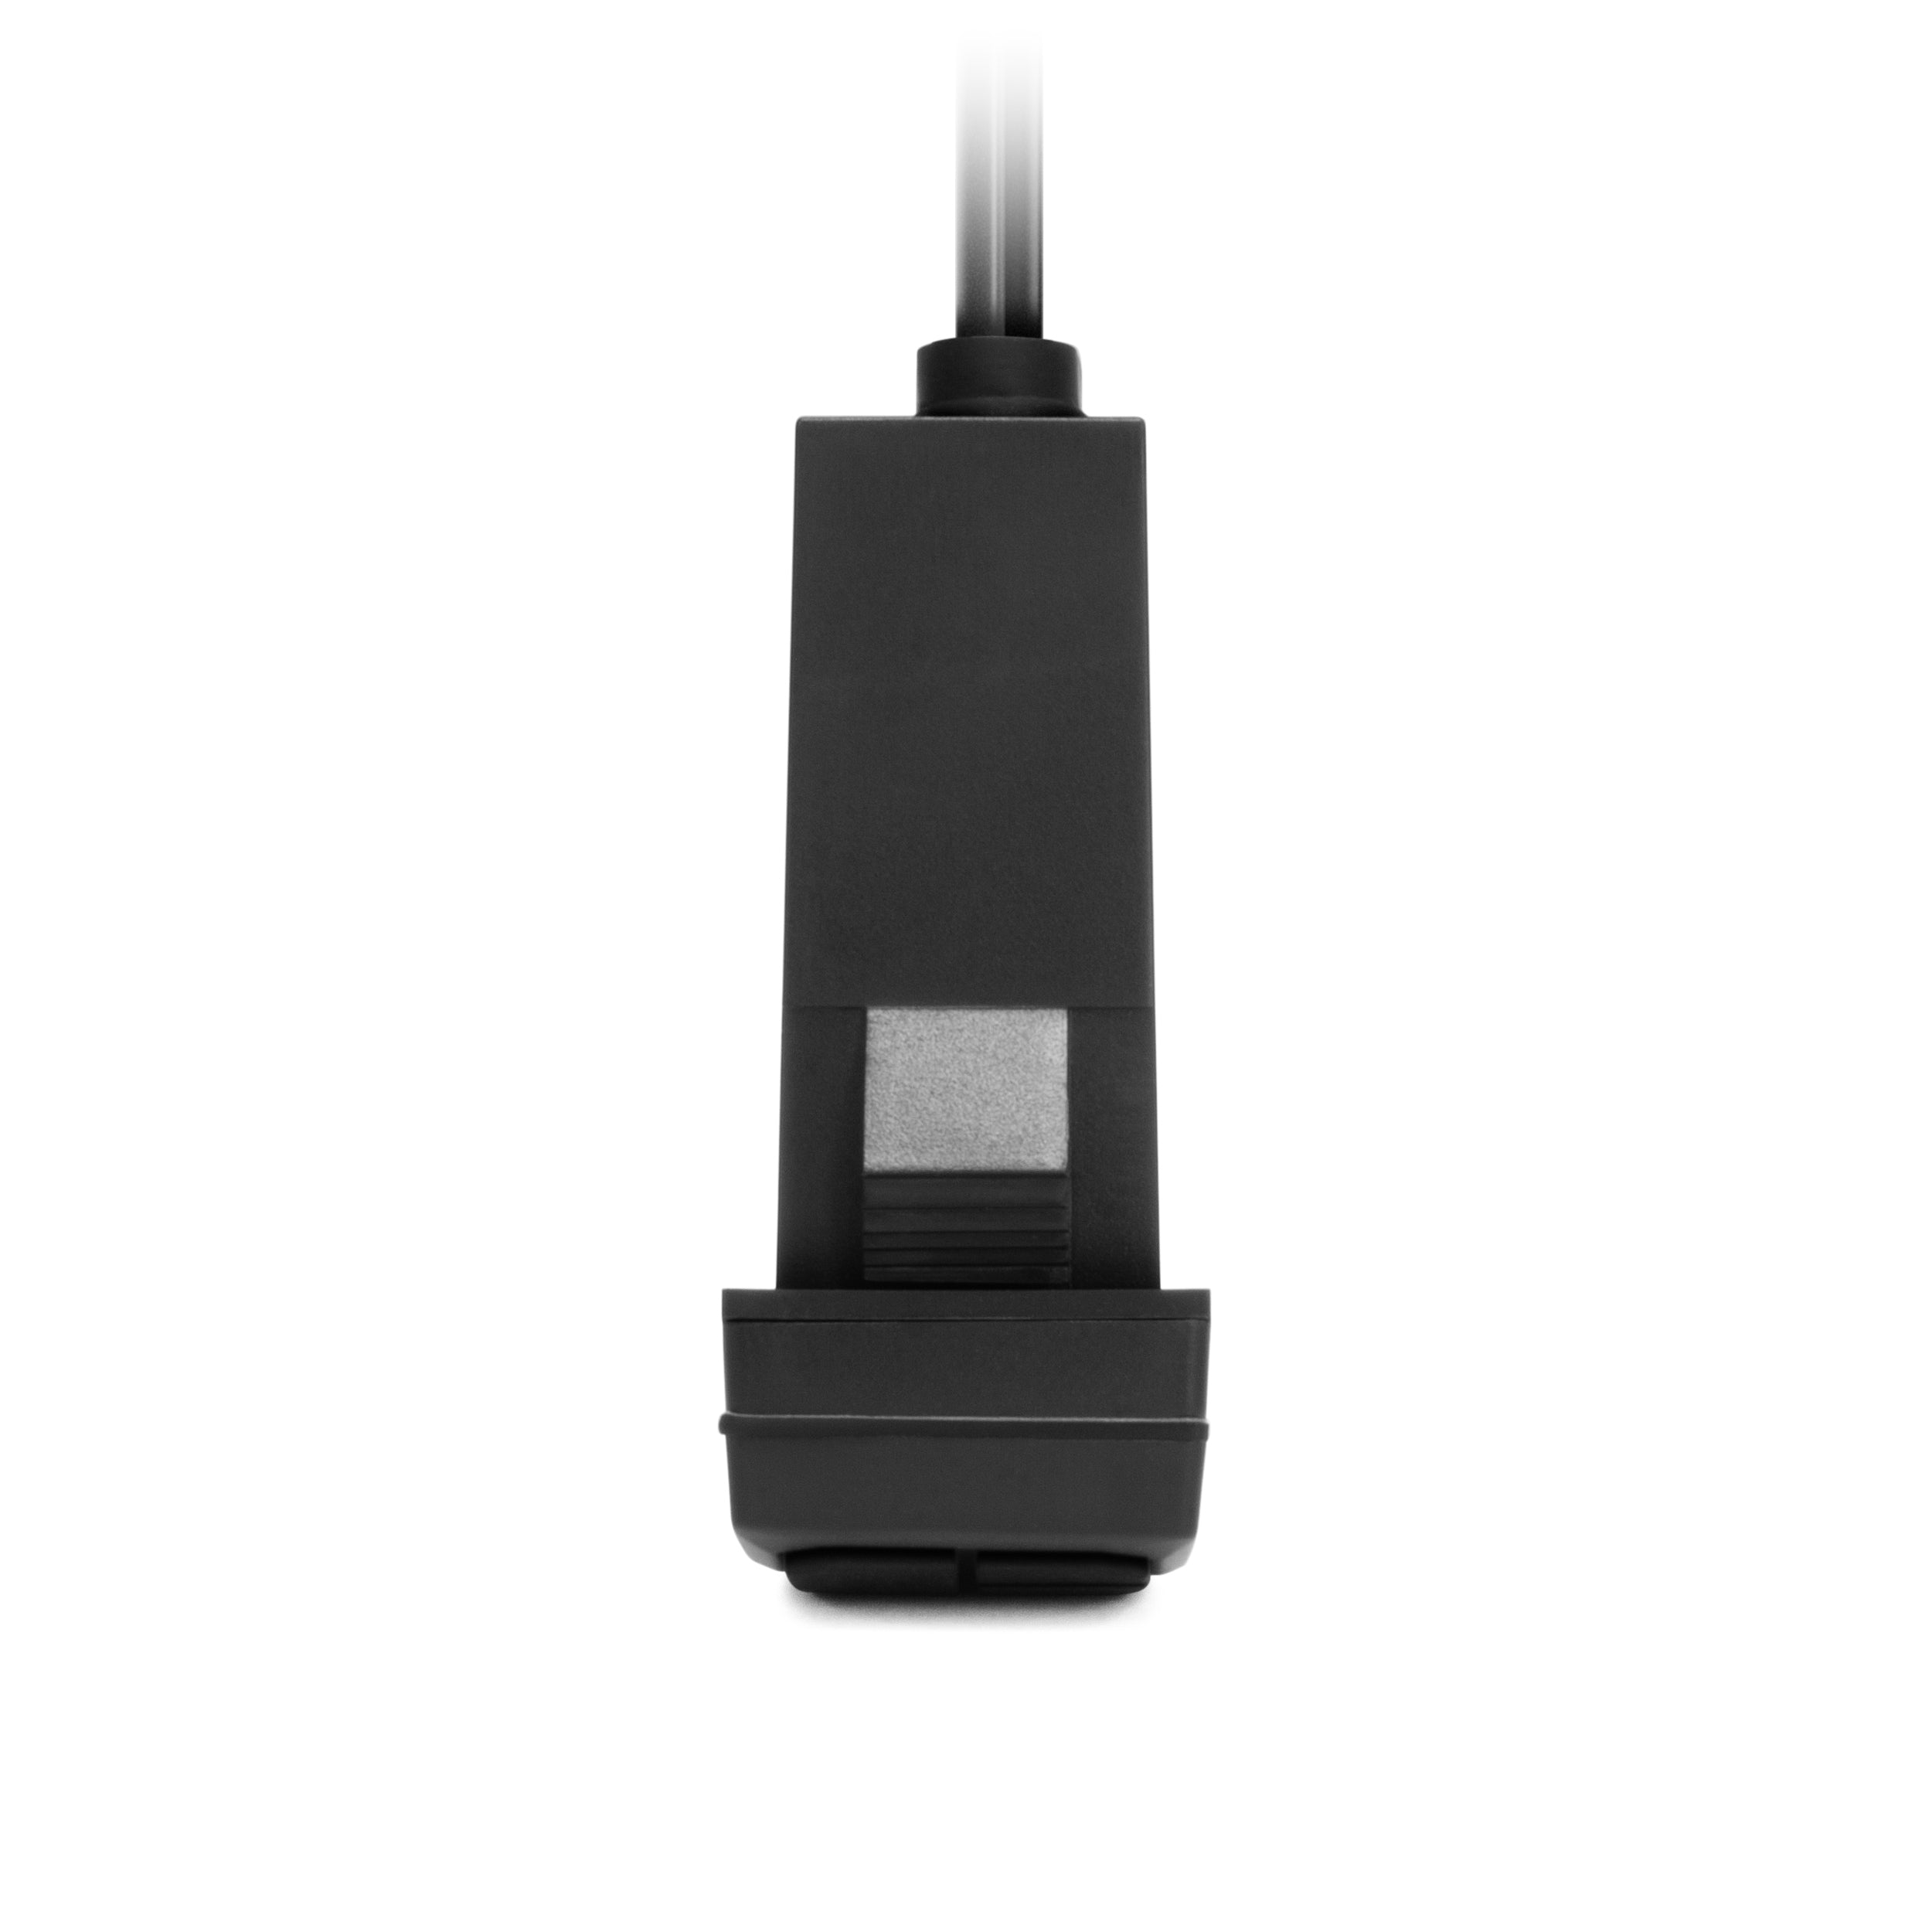 SoundExtreme by Ecoxgear Bluetooth Receiver Switch Top View